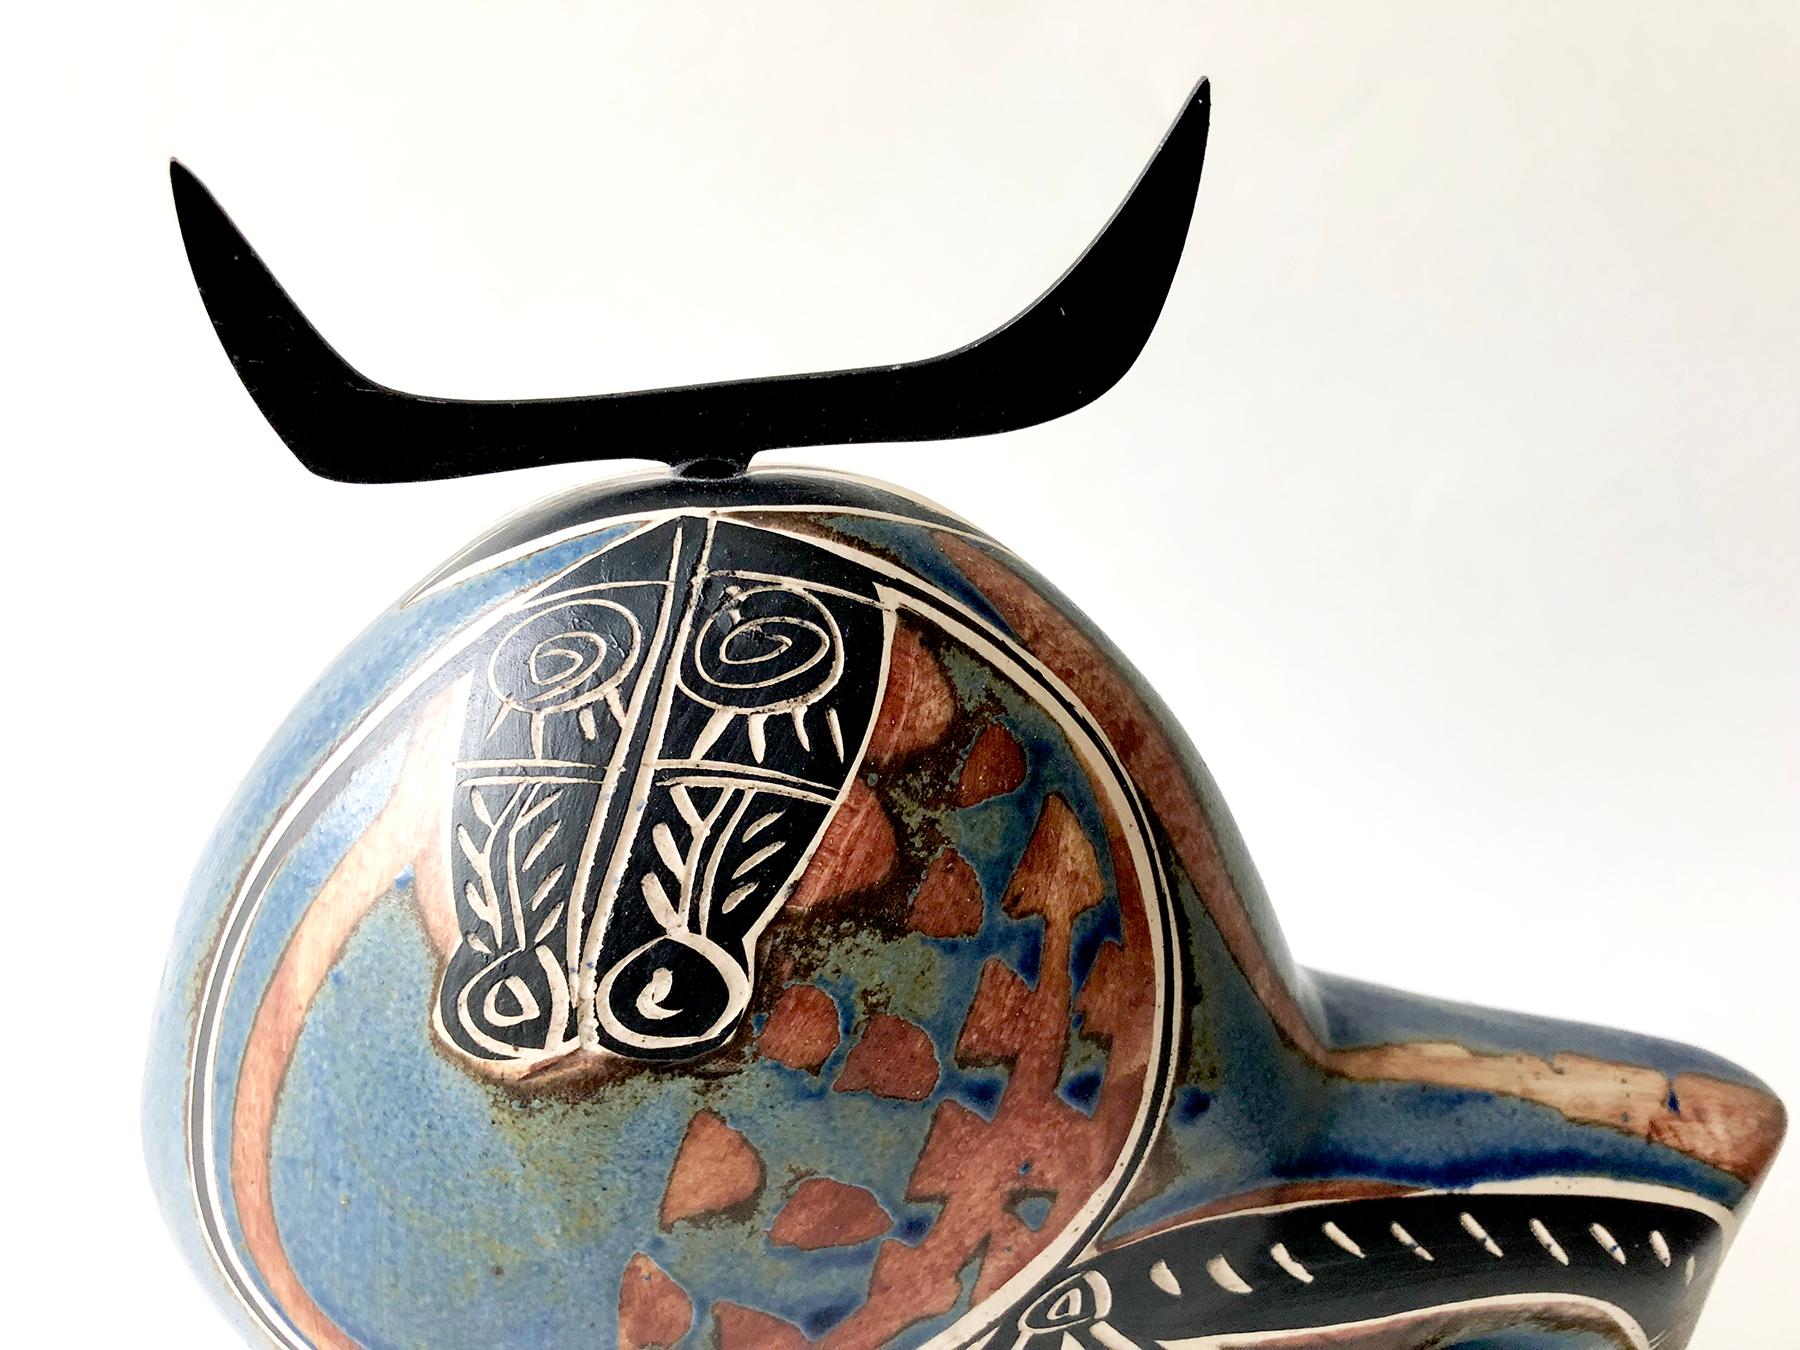 Picasso-esque ceramic bull sculpture with incised body, metal horns and wood base. Sculpture measures 10